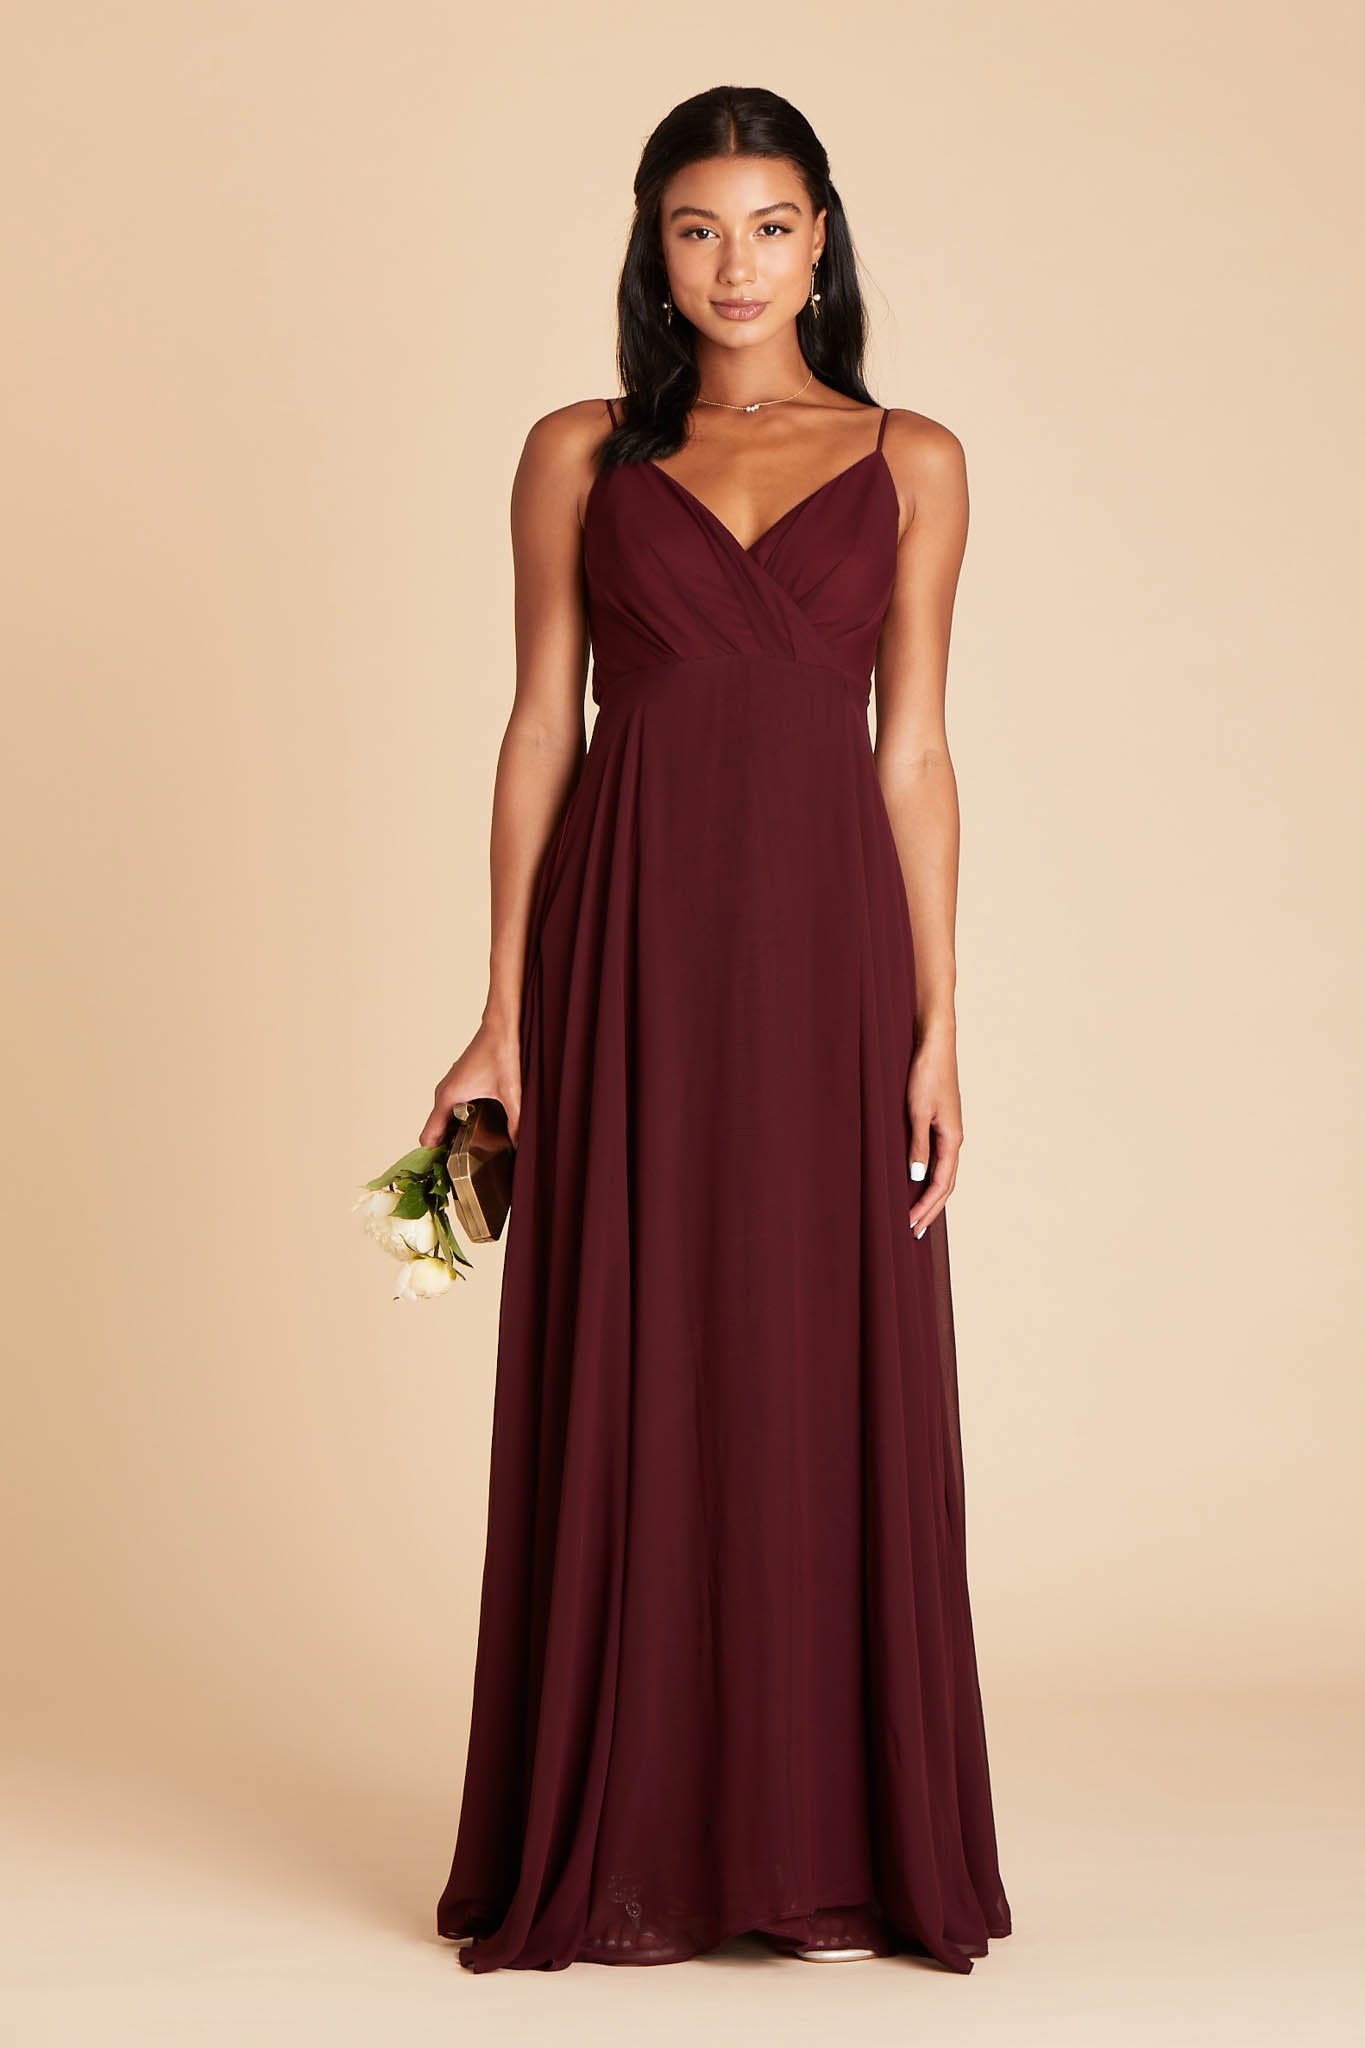 Kaia bridesmaids dress in cabernet burgundy chiffon by Birdy Grey, front view